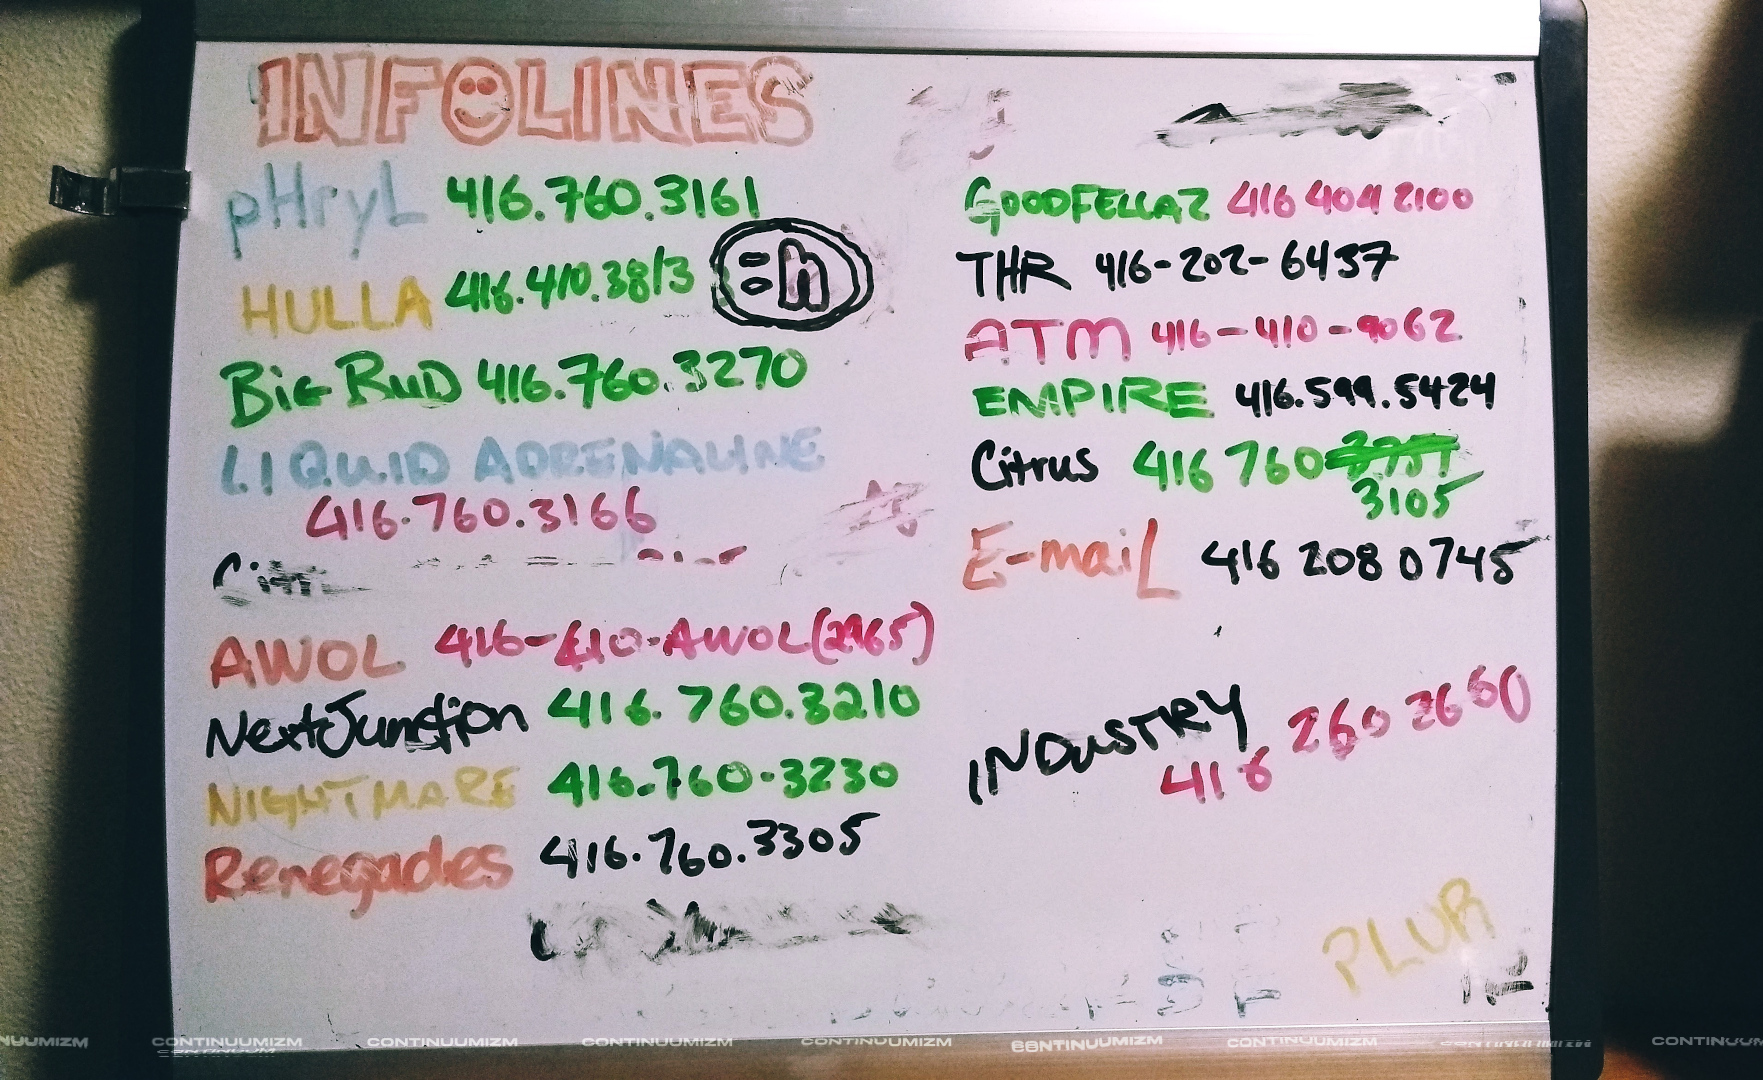 Rave infoline numbers seen on a whiteboard in multiple colours for party promoters in the late 90s in Toronto. Hotlines with 416 area code that wasn't mandatory in earlier party years including pHryL, Hullabaloo, Big Bug, Liquid Adrenaline, AWOL, Next Junction, Nightmare, Renegades, Goodfellaz, THR, ATM, Empire, Citrus, E-maiL, and the club Industry. PLUR included for good measure.